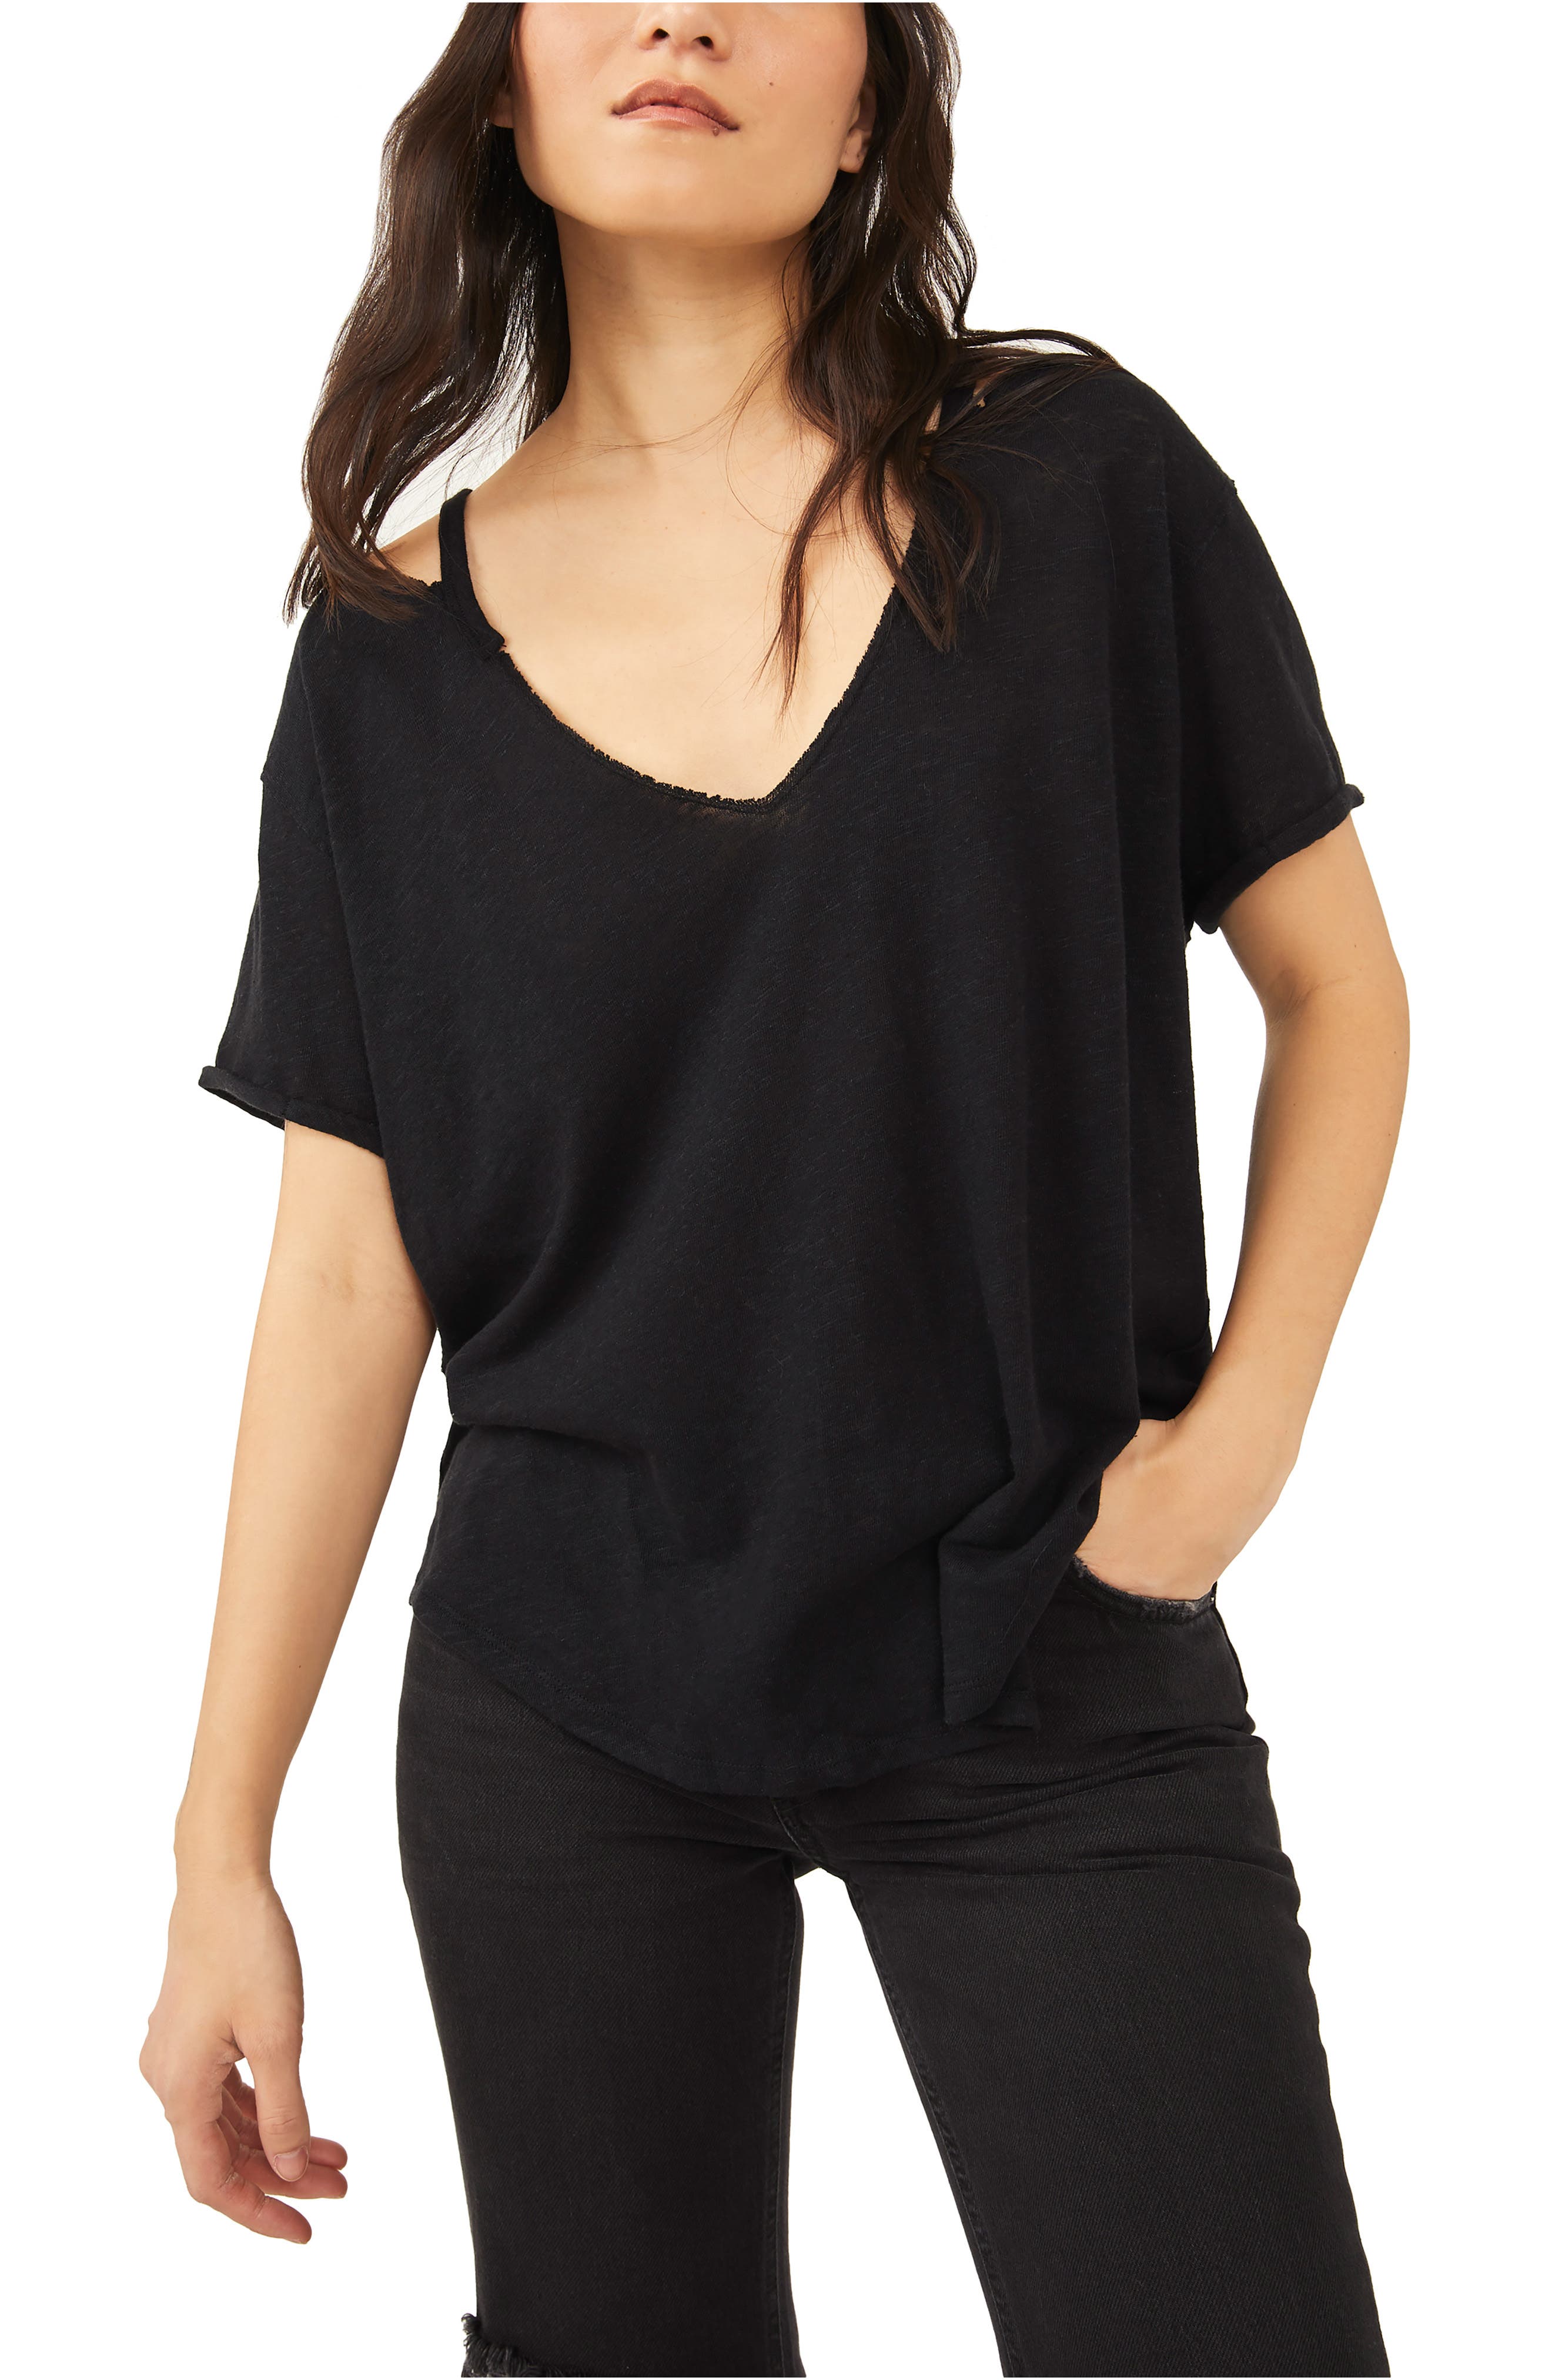 Free People Womens Shirt Top V-Neck High Low Black sizes XS Large NEW 